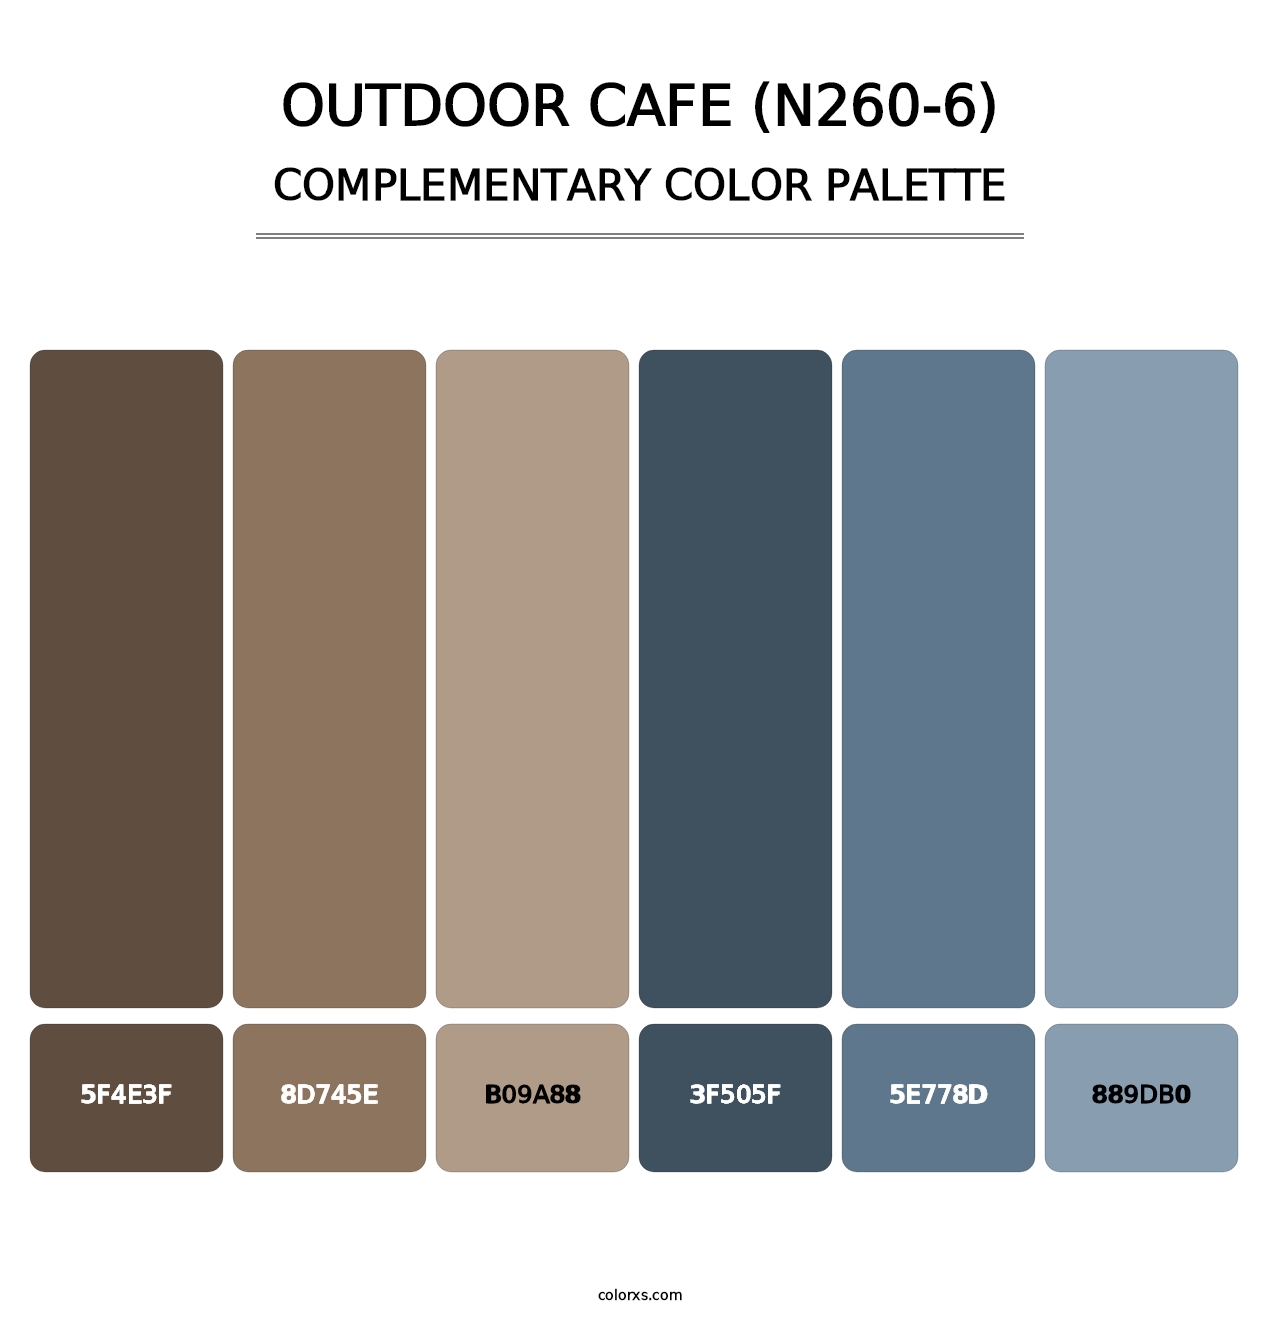 Outdoor Cafe (N260-6) - Complementary Color Palette